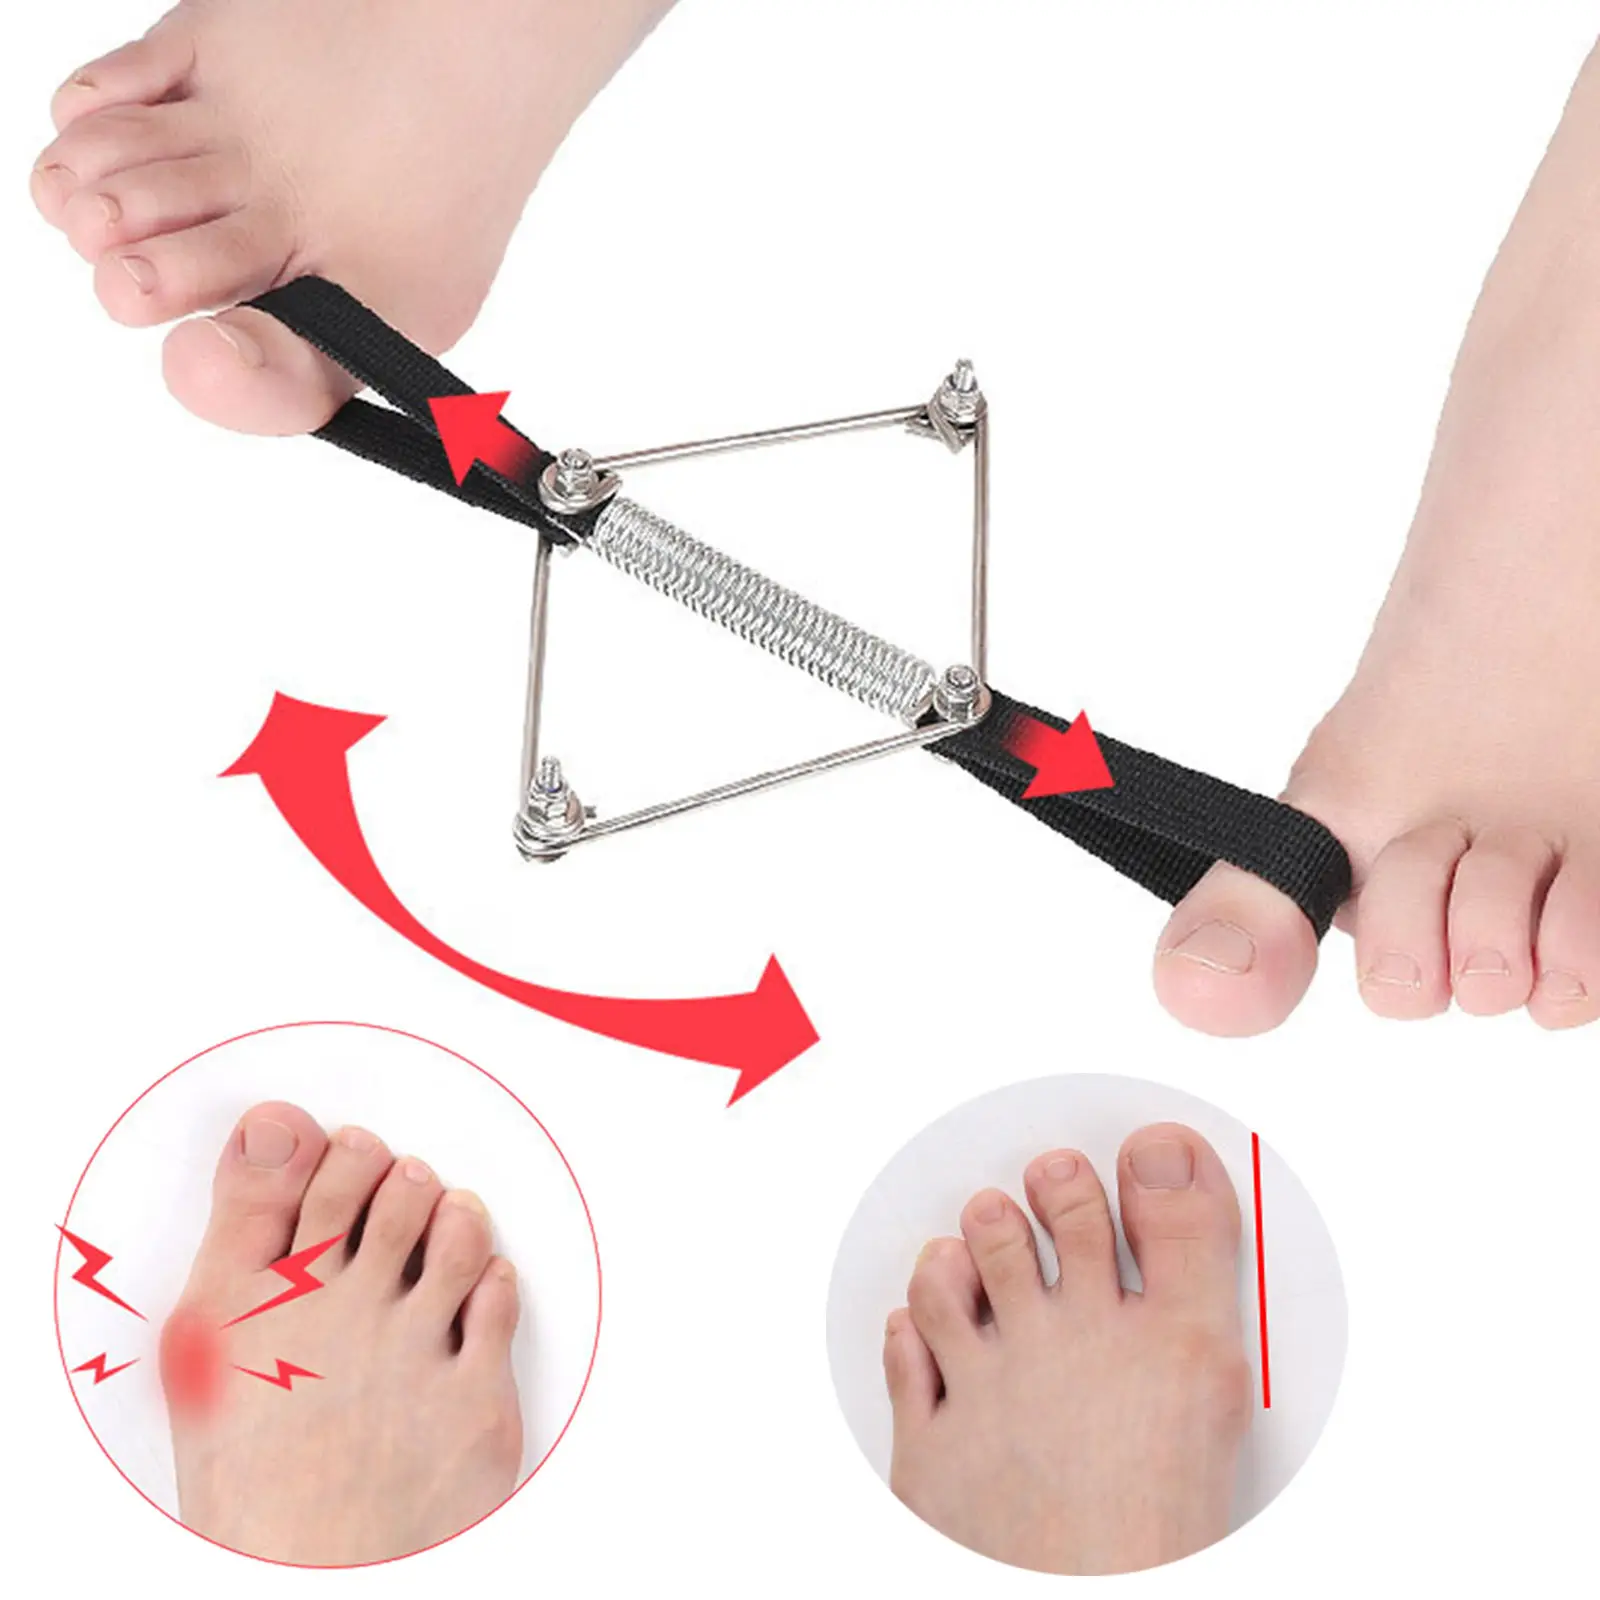 Bunion Corrector Elastic Toe Straightener Toe Exerciser for Hammer Toes Big Toe Joint Fitness Use Foot Care Correct Your Toes